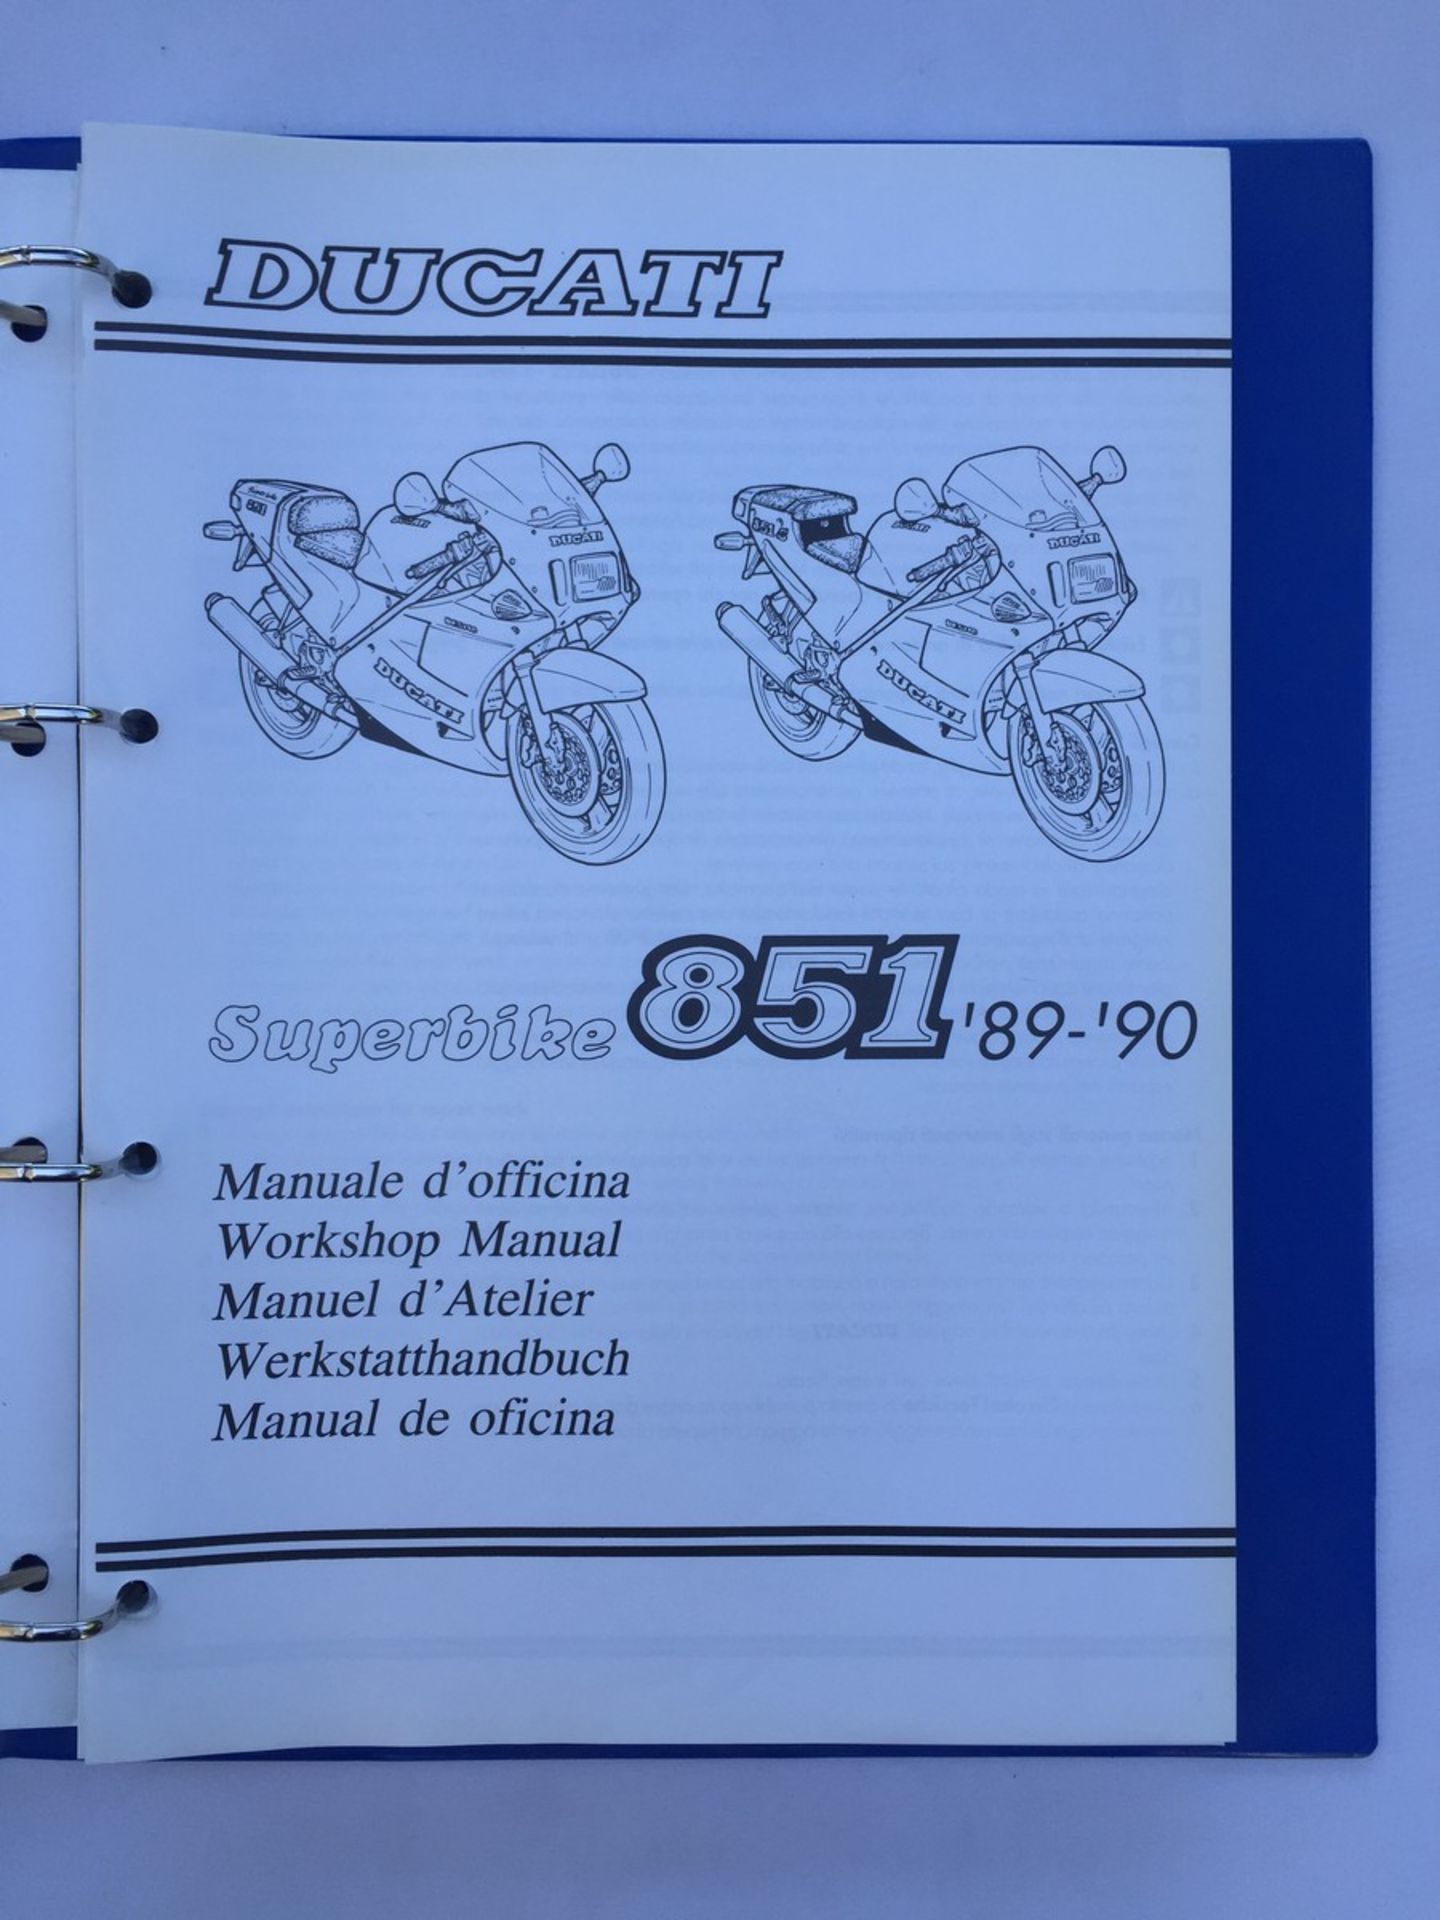 A Ducati 851 '89-90 manual for an early Strada. - Image 2 of 2